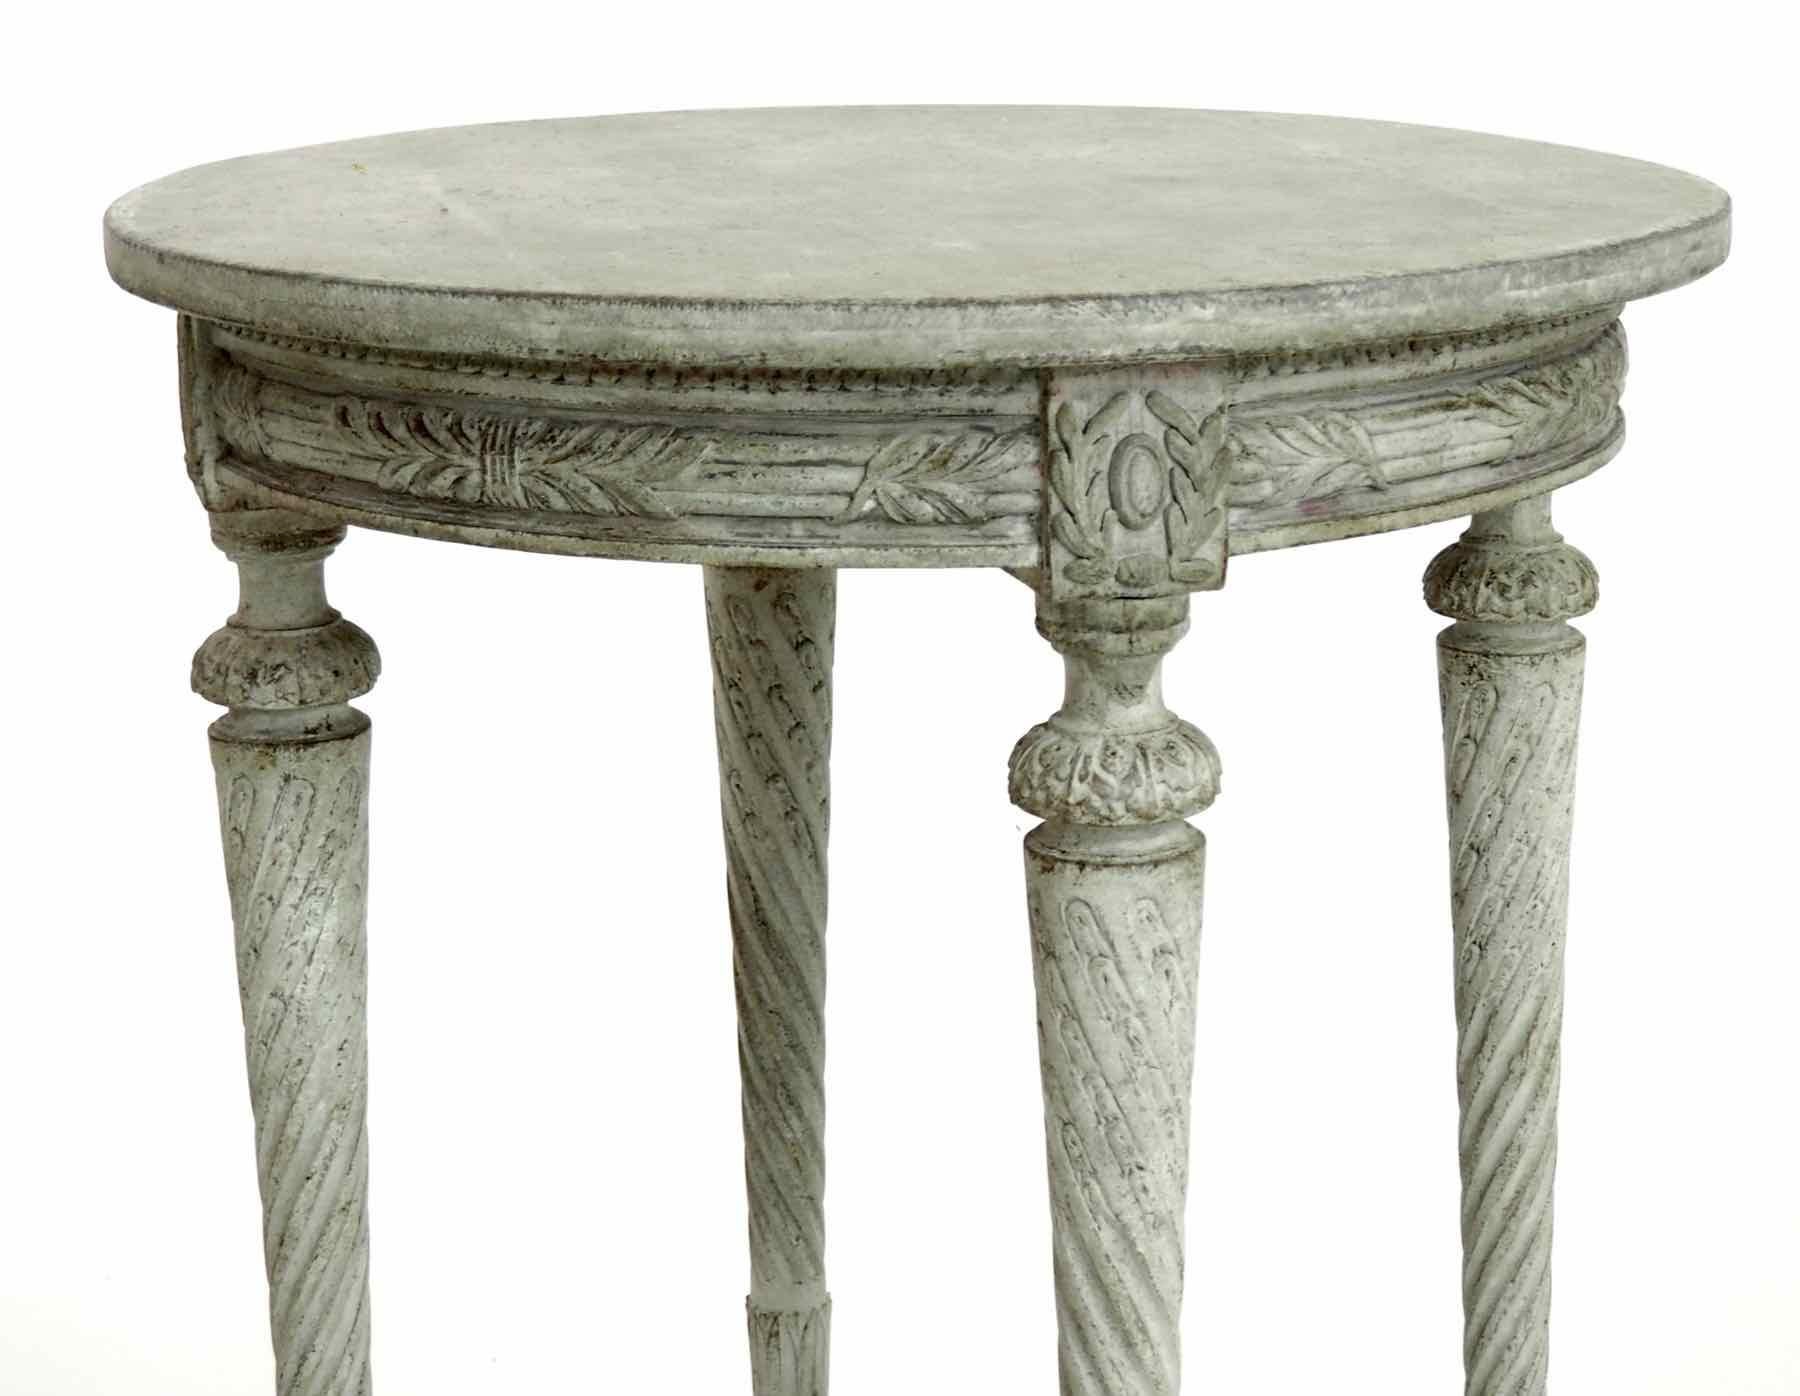 19th century rare freestanding Gustavian style centre table, with beautiful flower carvings.